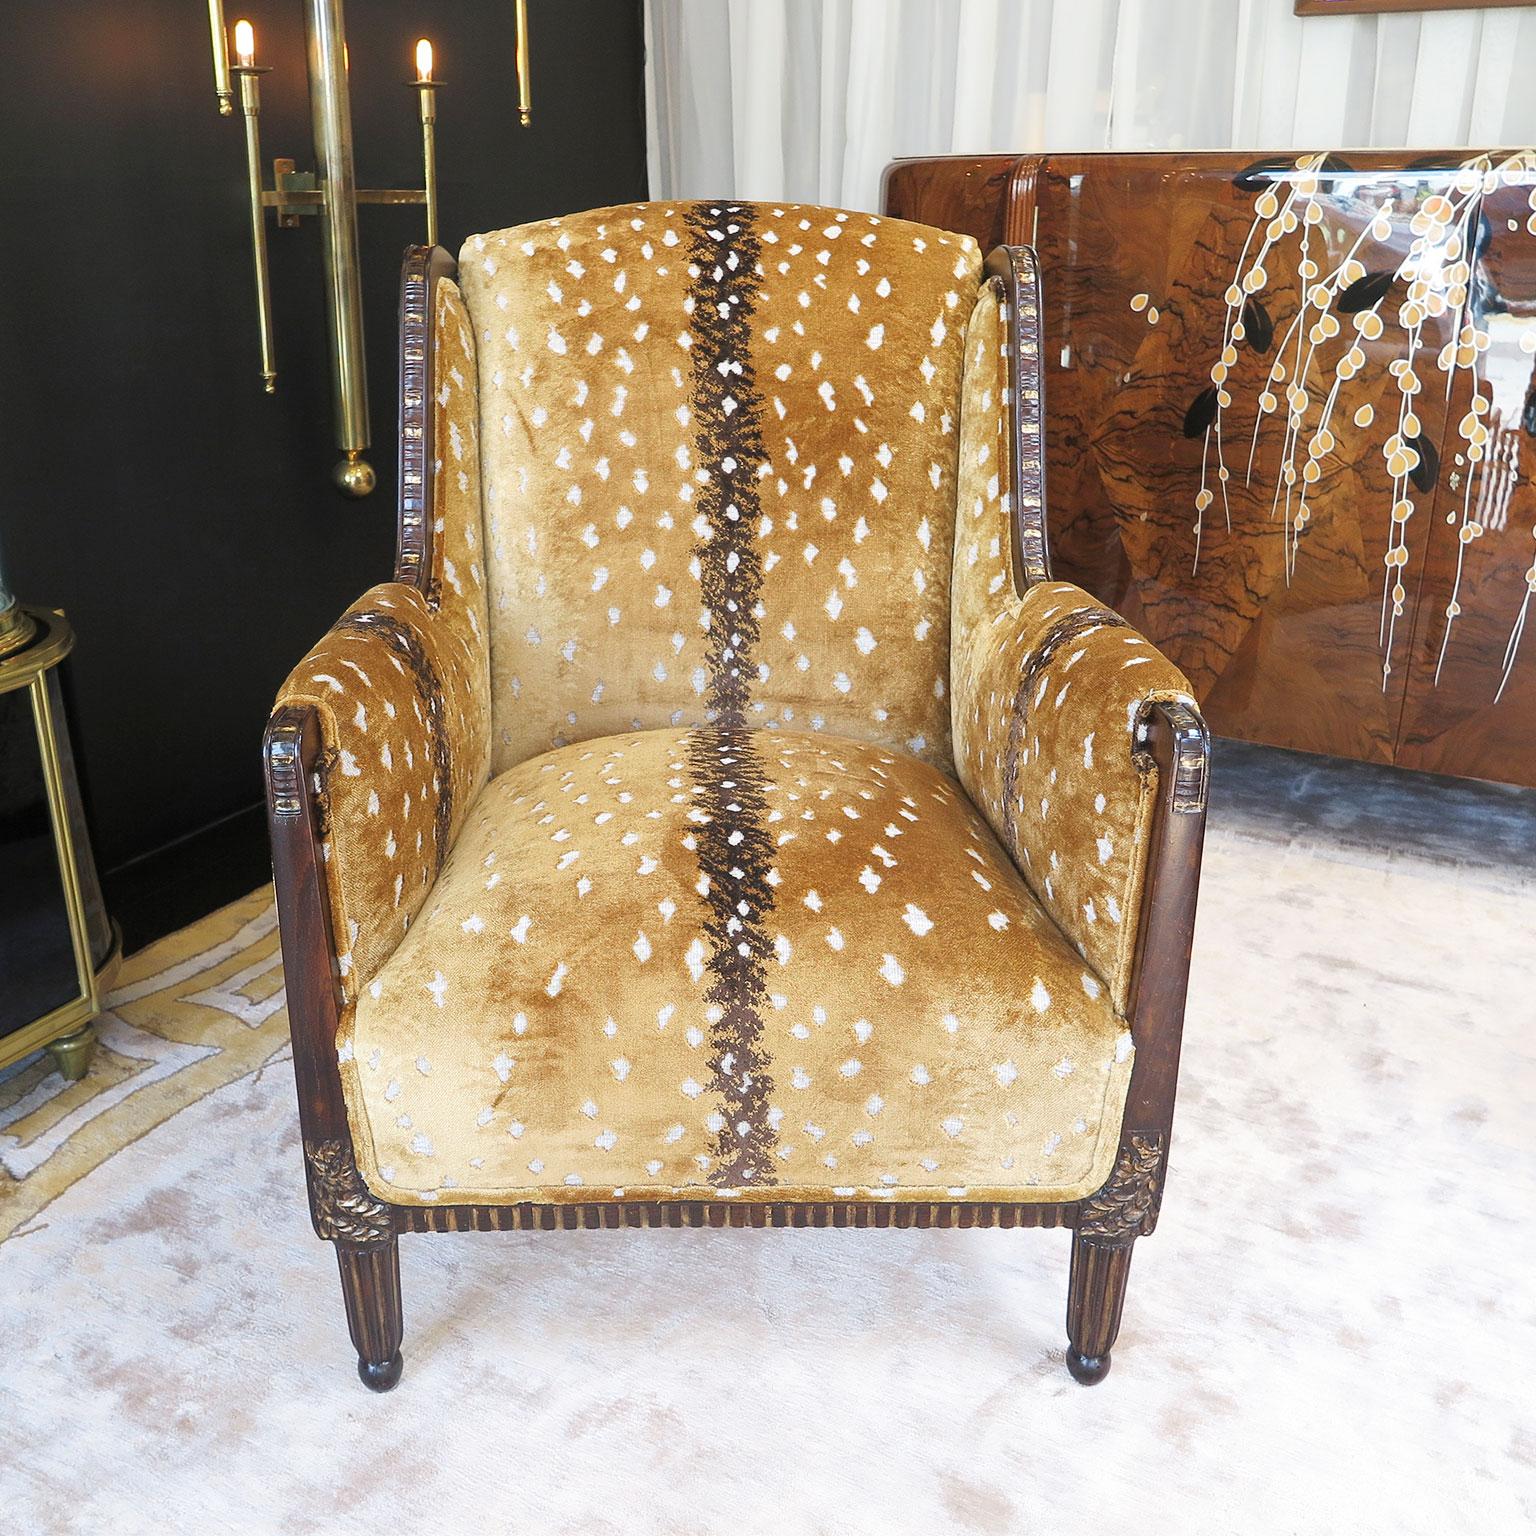 French Art Deco chairs with a Classic wingback style. The frame is in a dark stained maple wood with linear ribbed gold leaf carvings along the arms and lower frame. An intricate floral carving sit above the upper front legs done in gold leaf. The